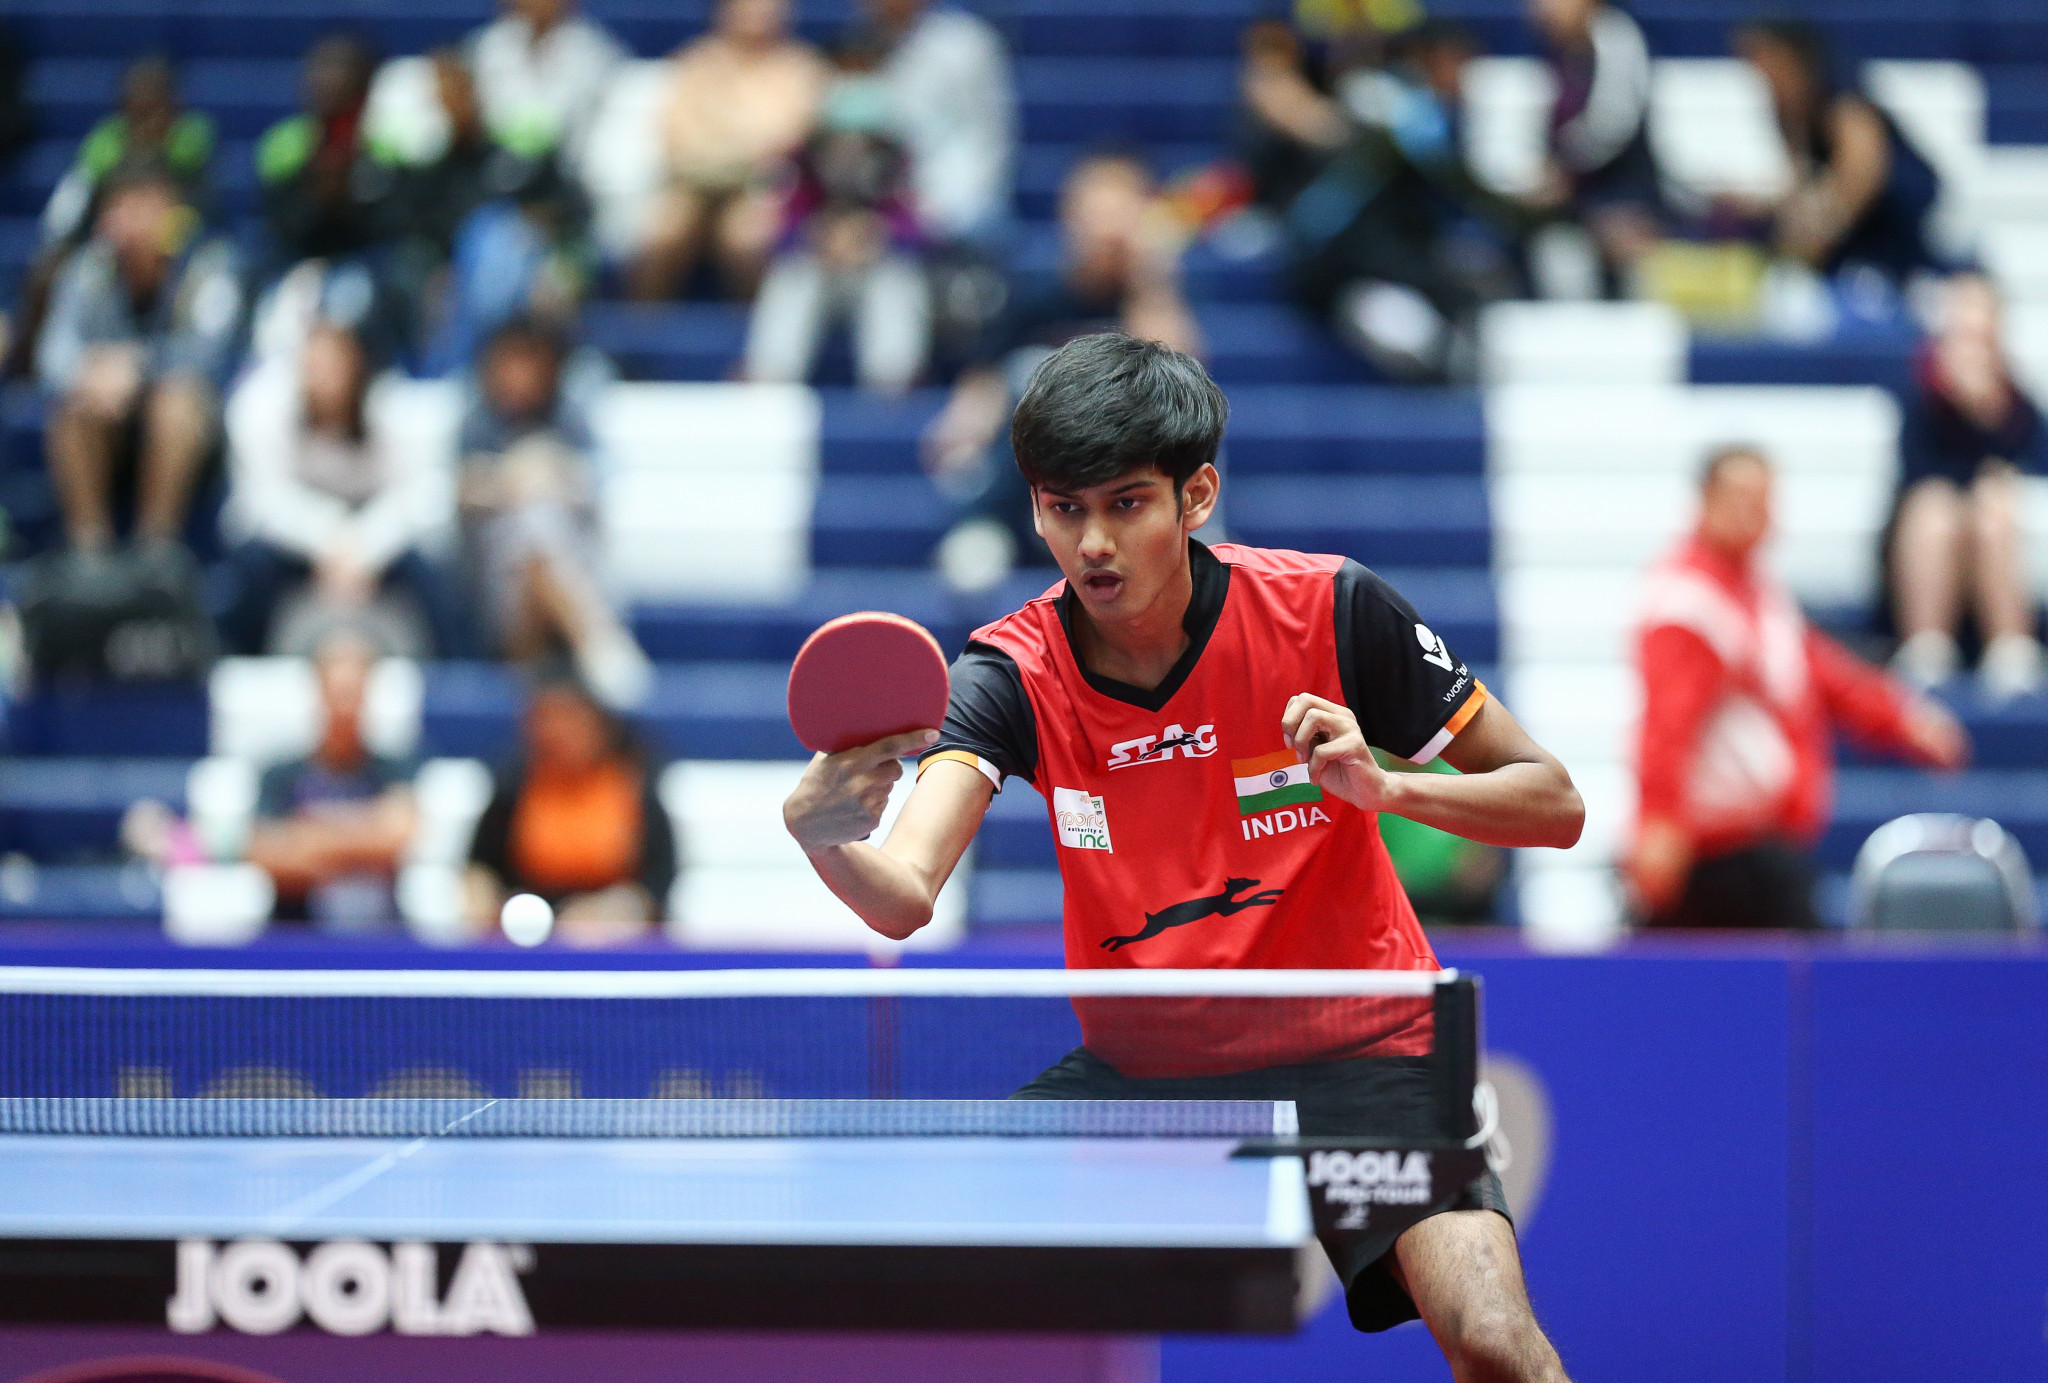 India defeated Peru 3-0 at the ITTF World Junior Table Tennis Championships ©ITTF